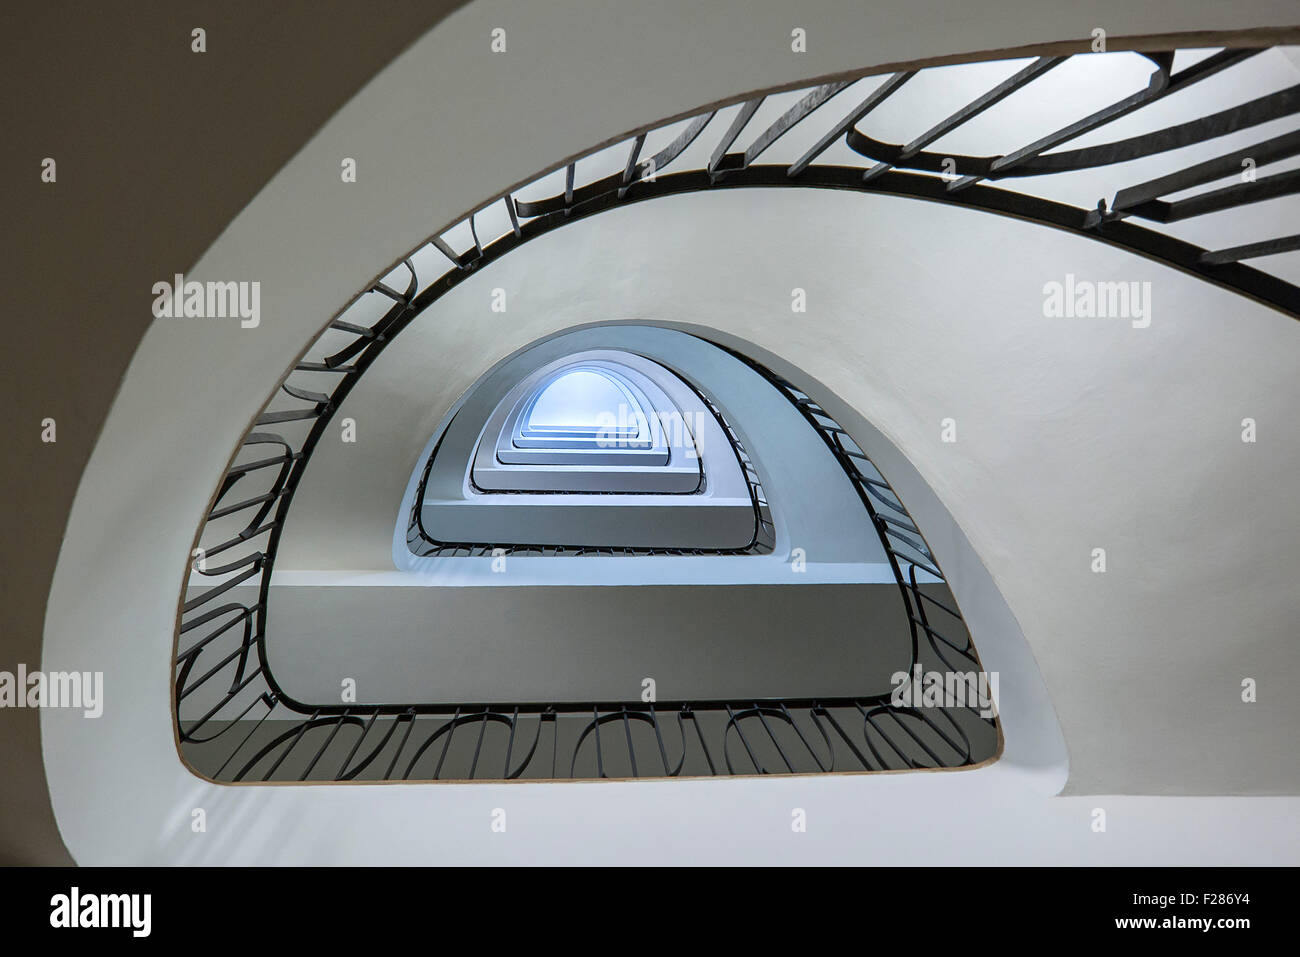 Stairs, spiral staircase, looking up, Munich, Bavaria, Germany Stock Photo